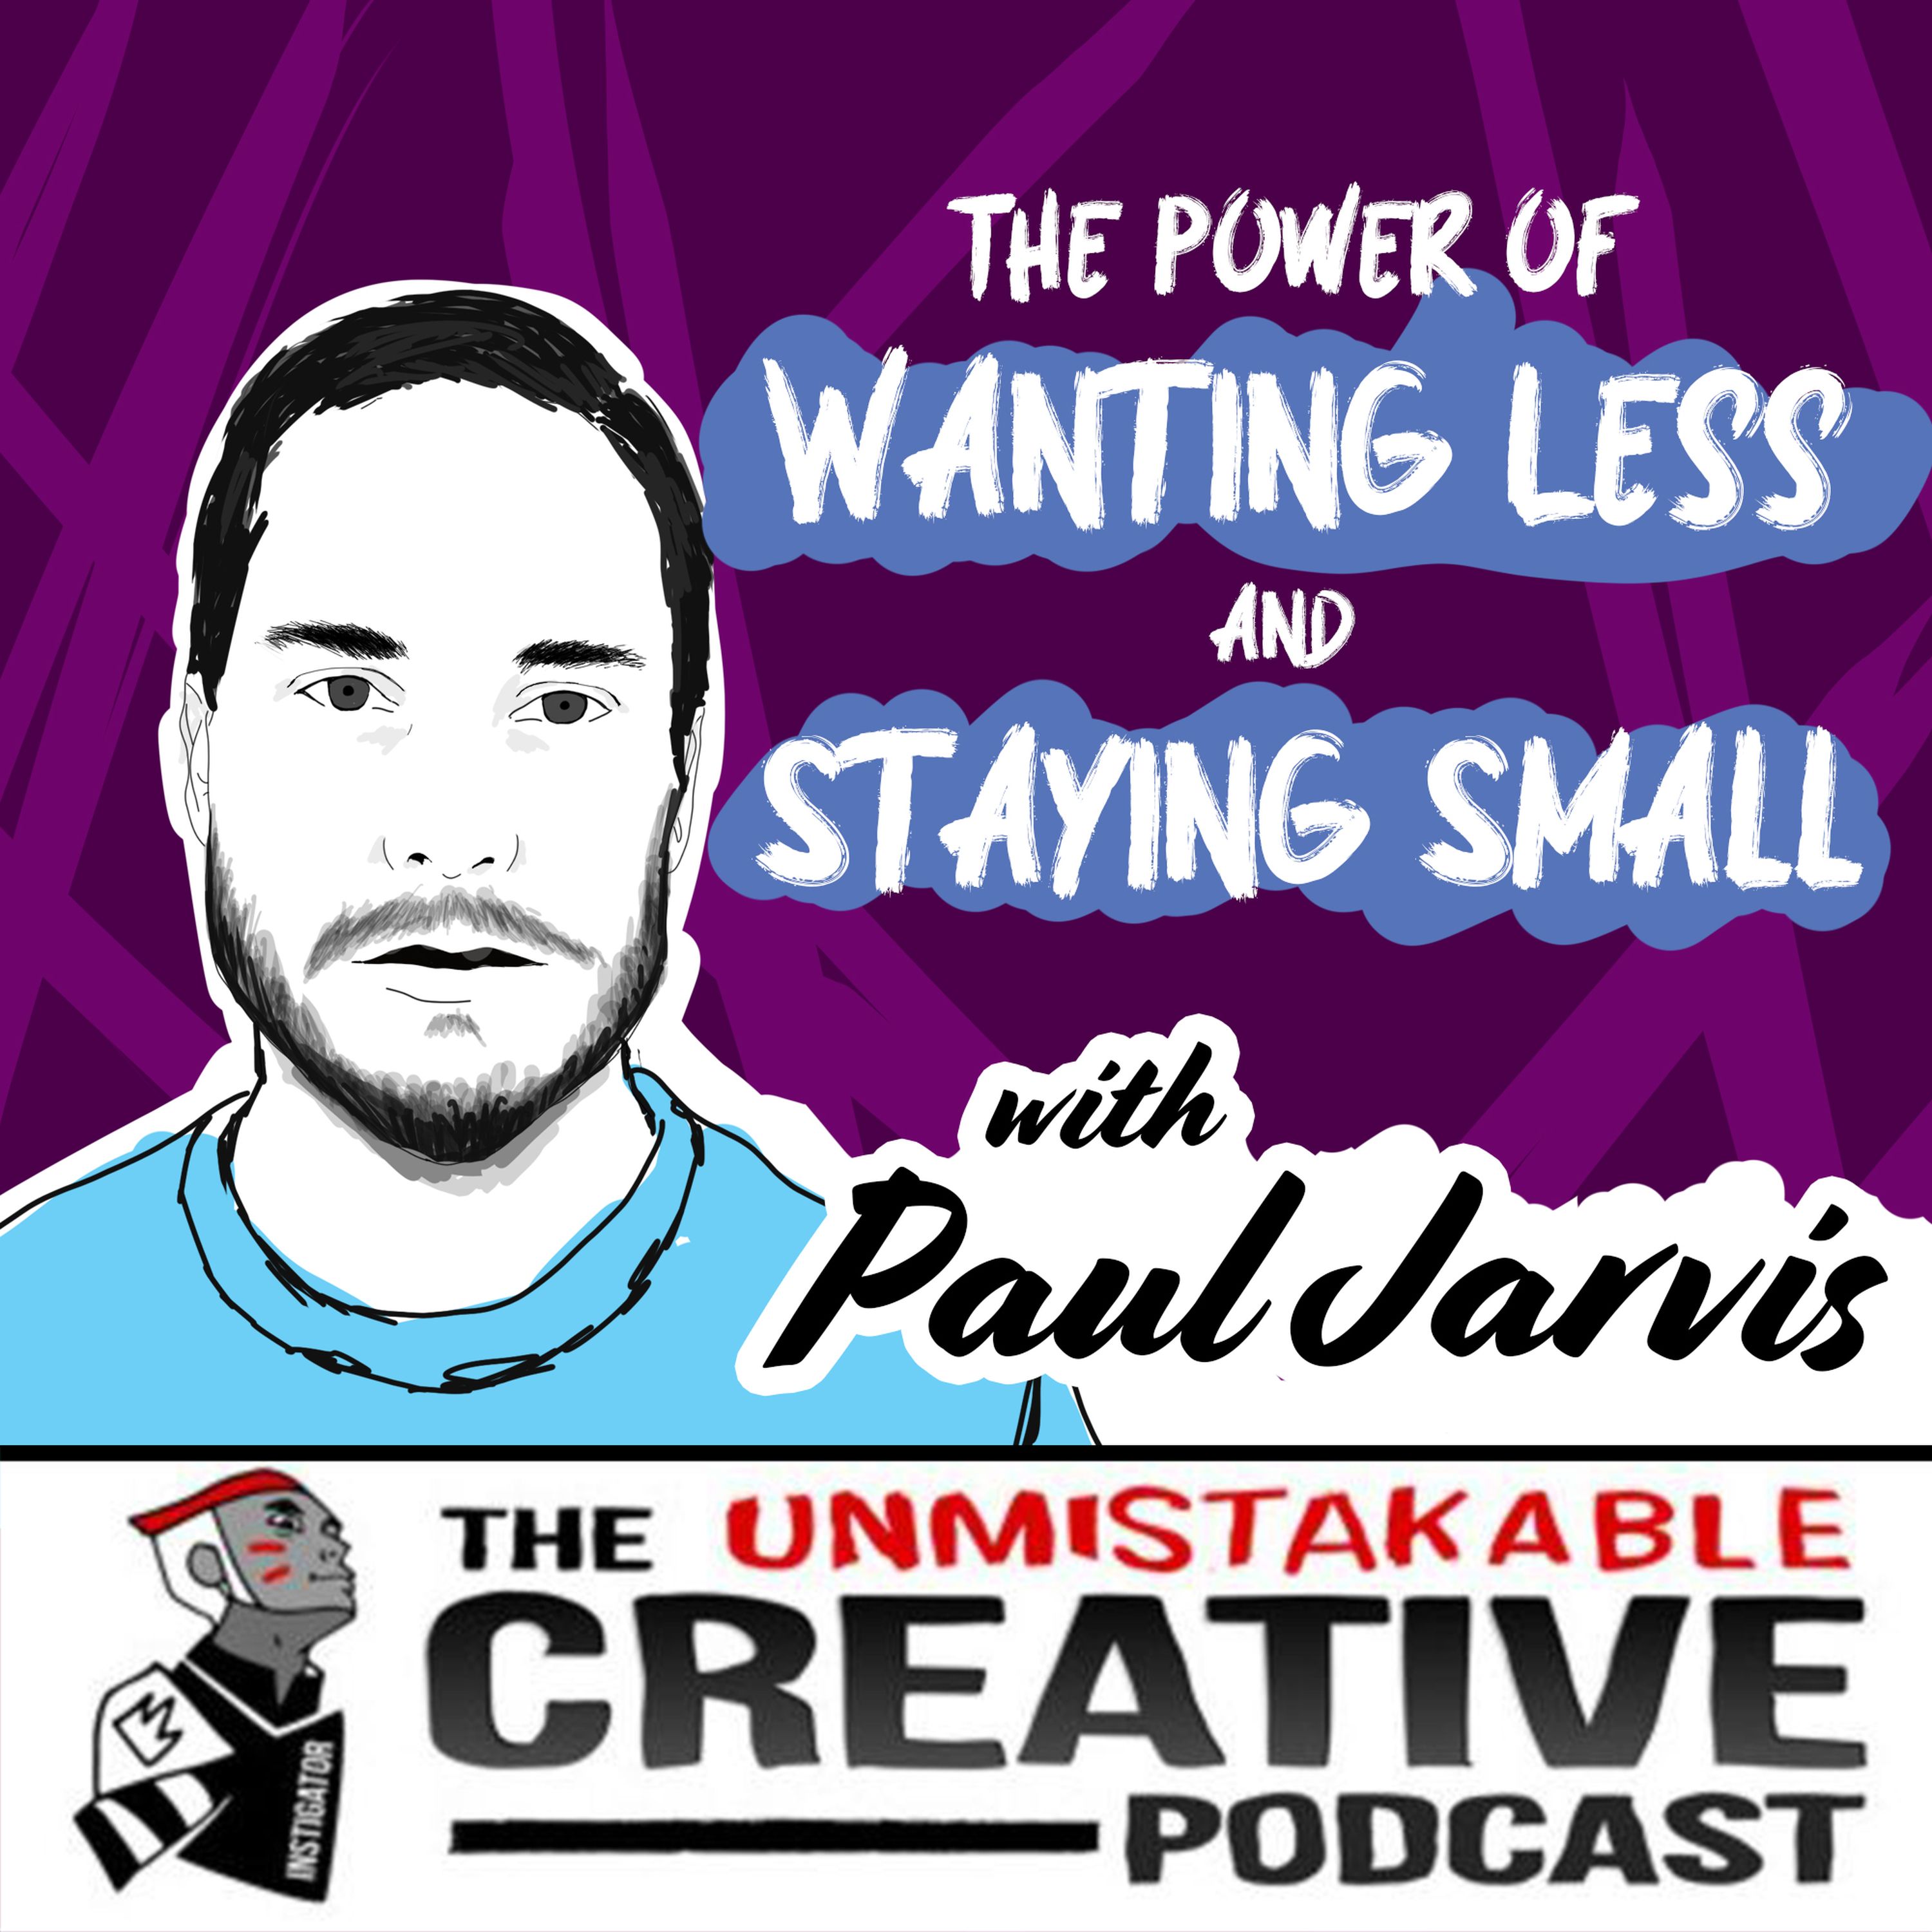 The Power of Wanting Less and Staying Small with Paul Jarvis